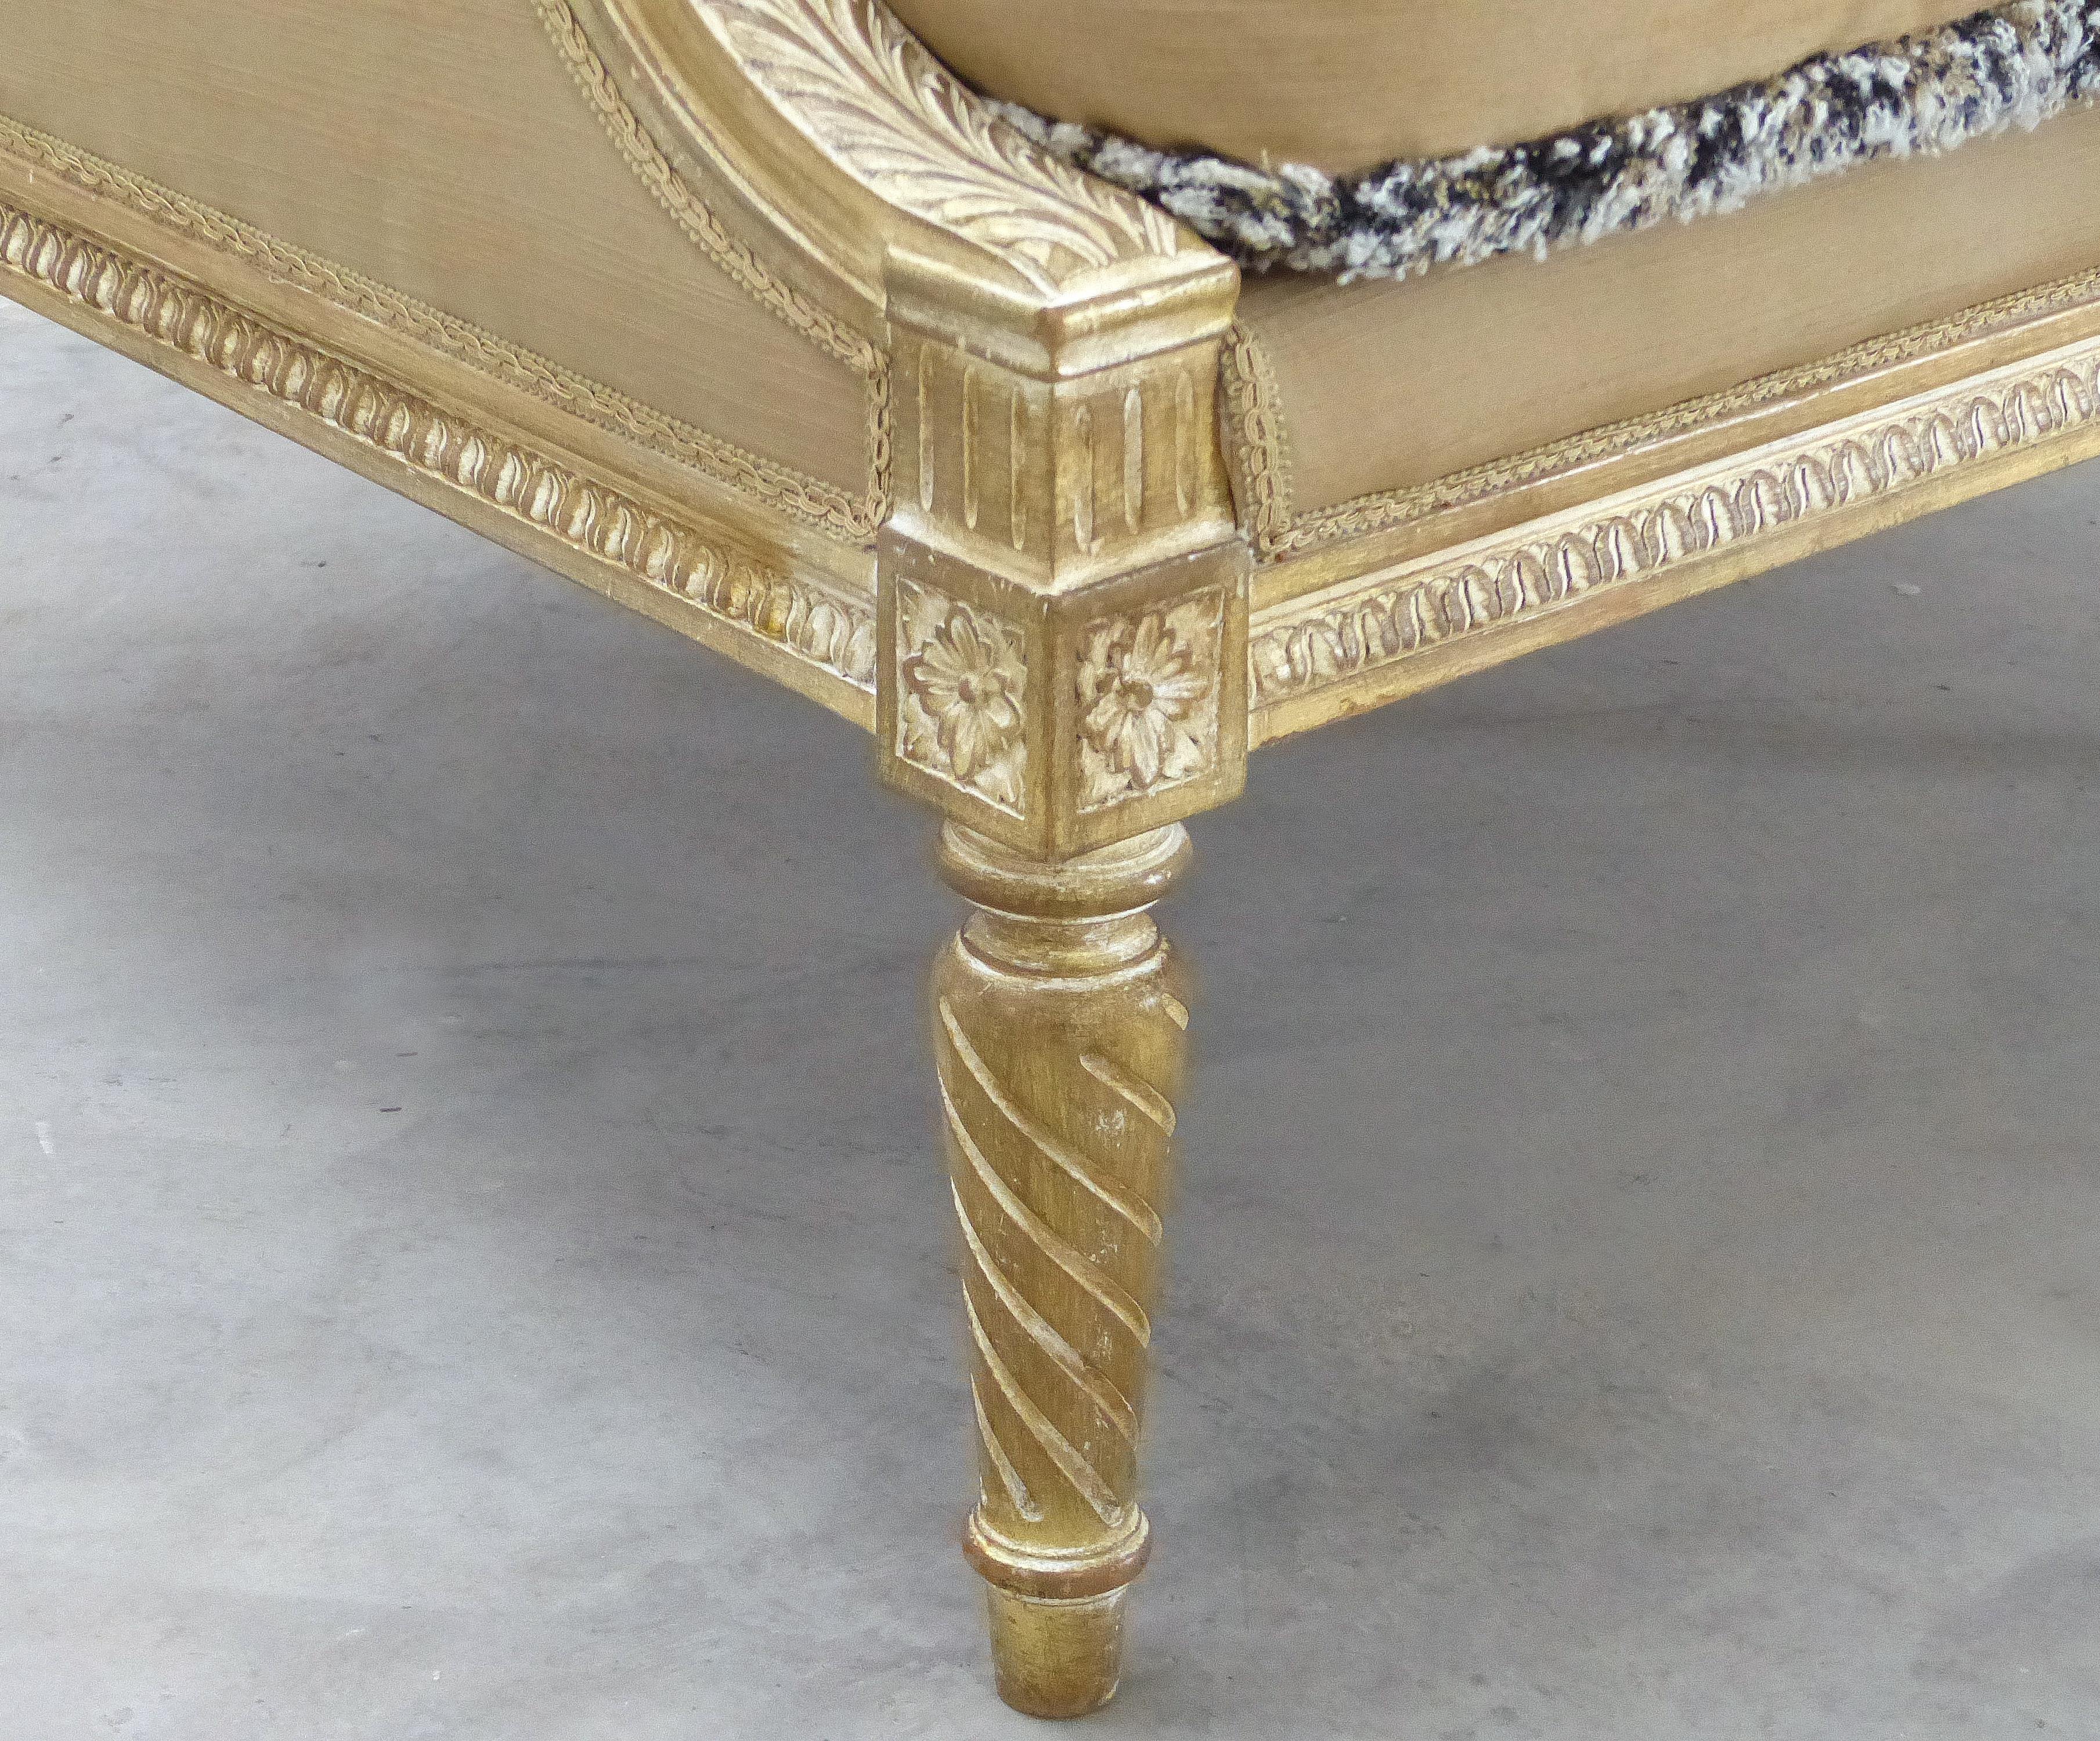 Contemporary Provasi Parcel-Gilt Louis Vxi Style Upholstered Bergere